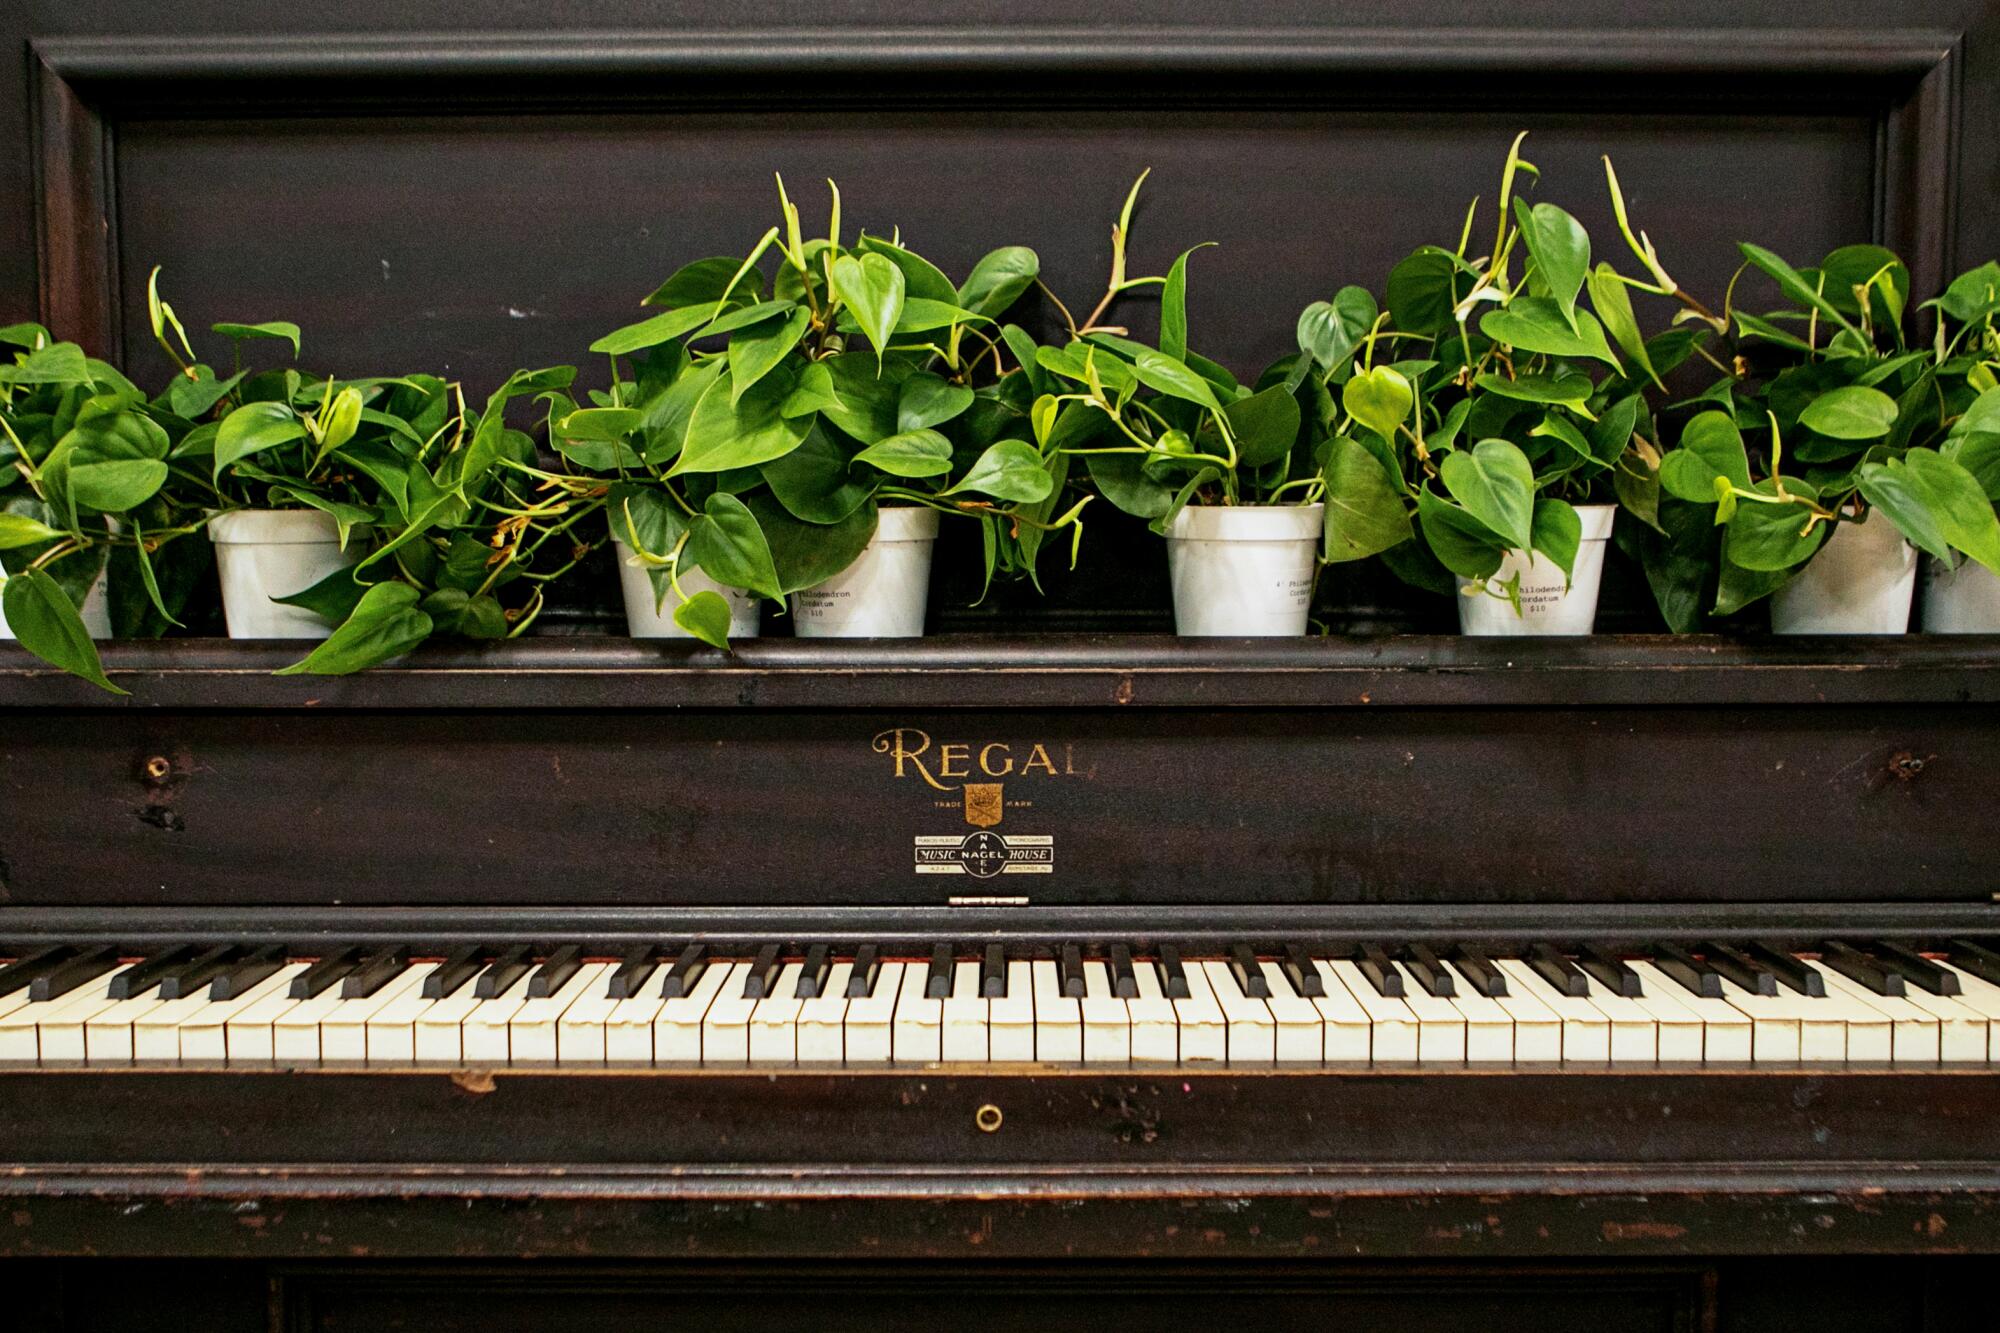 Plants line up in a row atop an old piano.